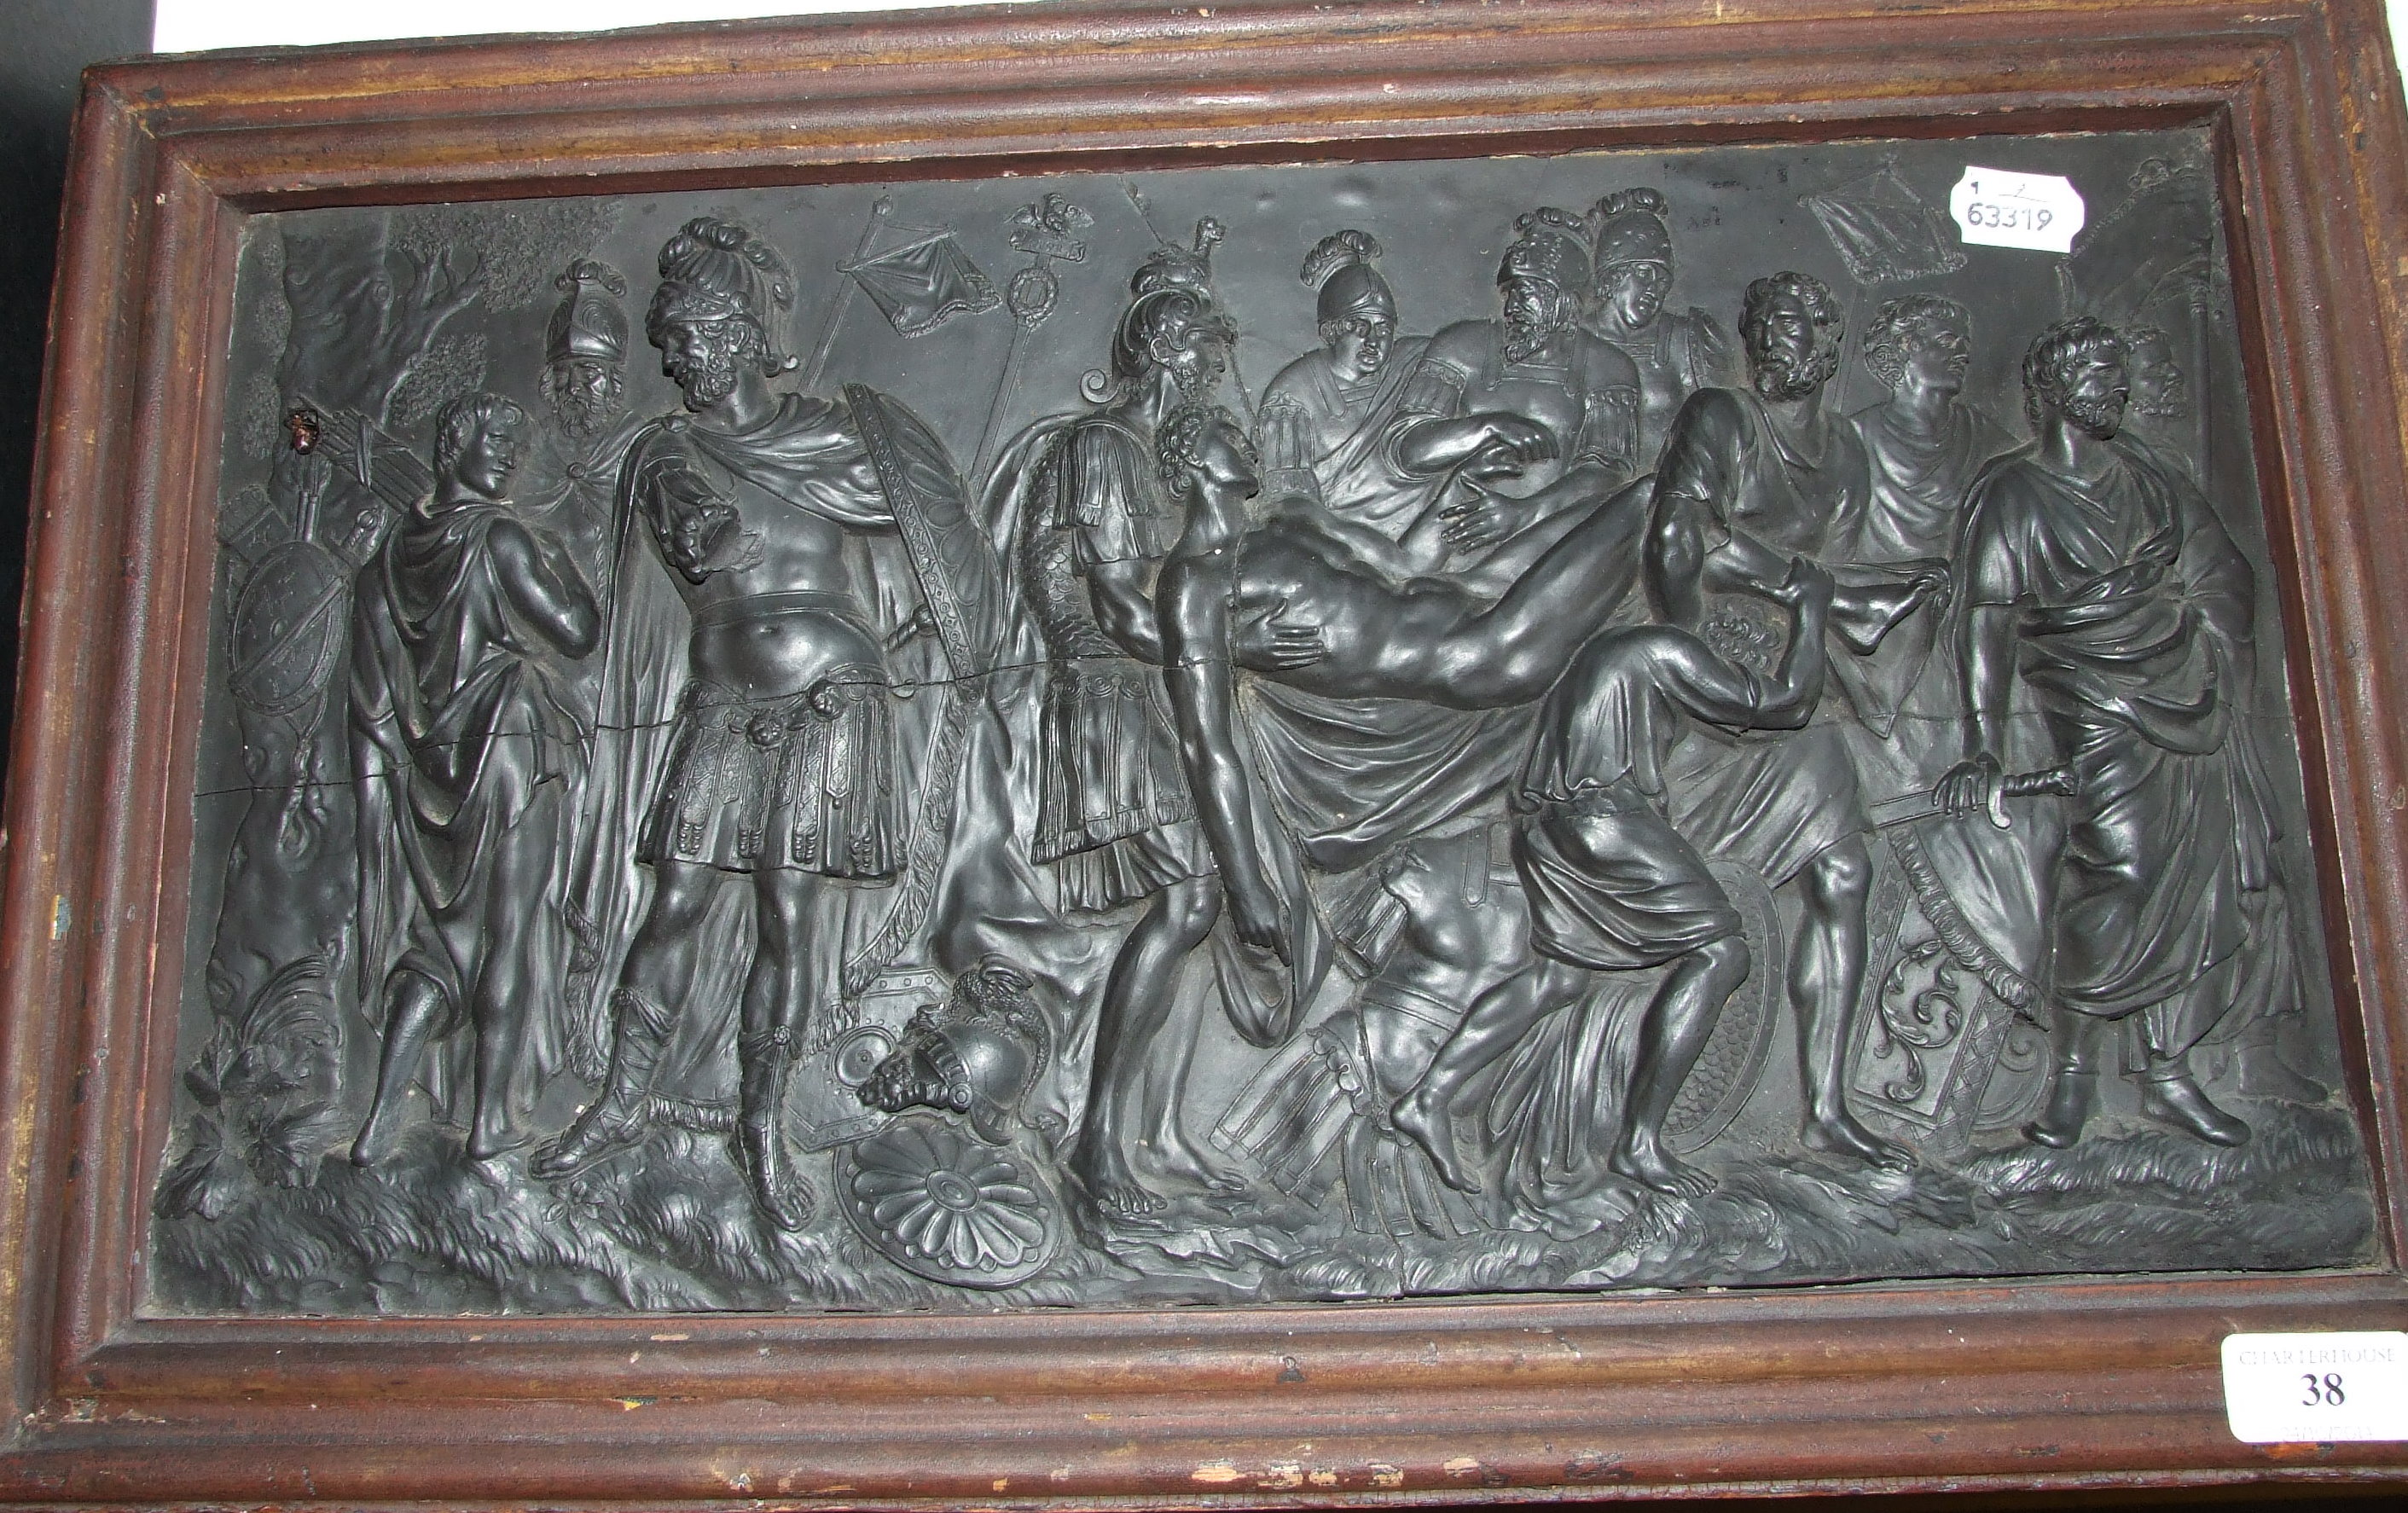 A Wedgwood style black basalt plaque, 'The Death of a Roman Warrior', 26 x 49 cm, framed (repaired)